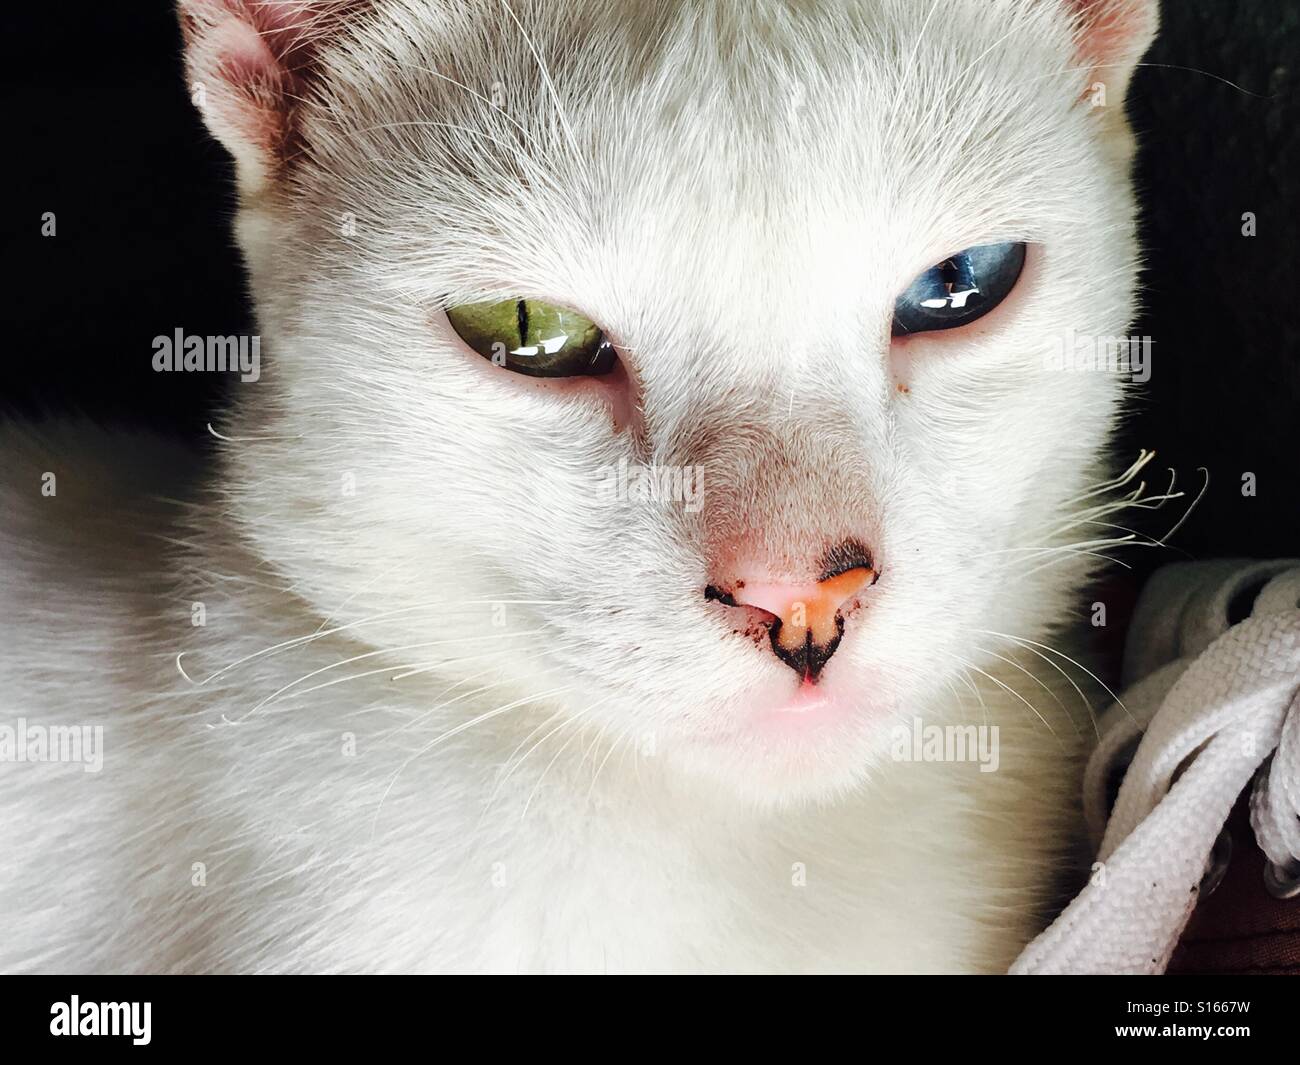 White cat with green and blue eyes Stock Photo